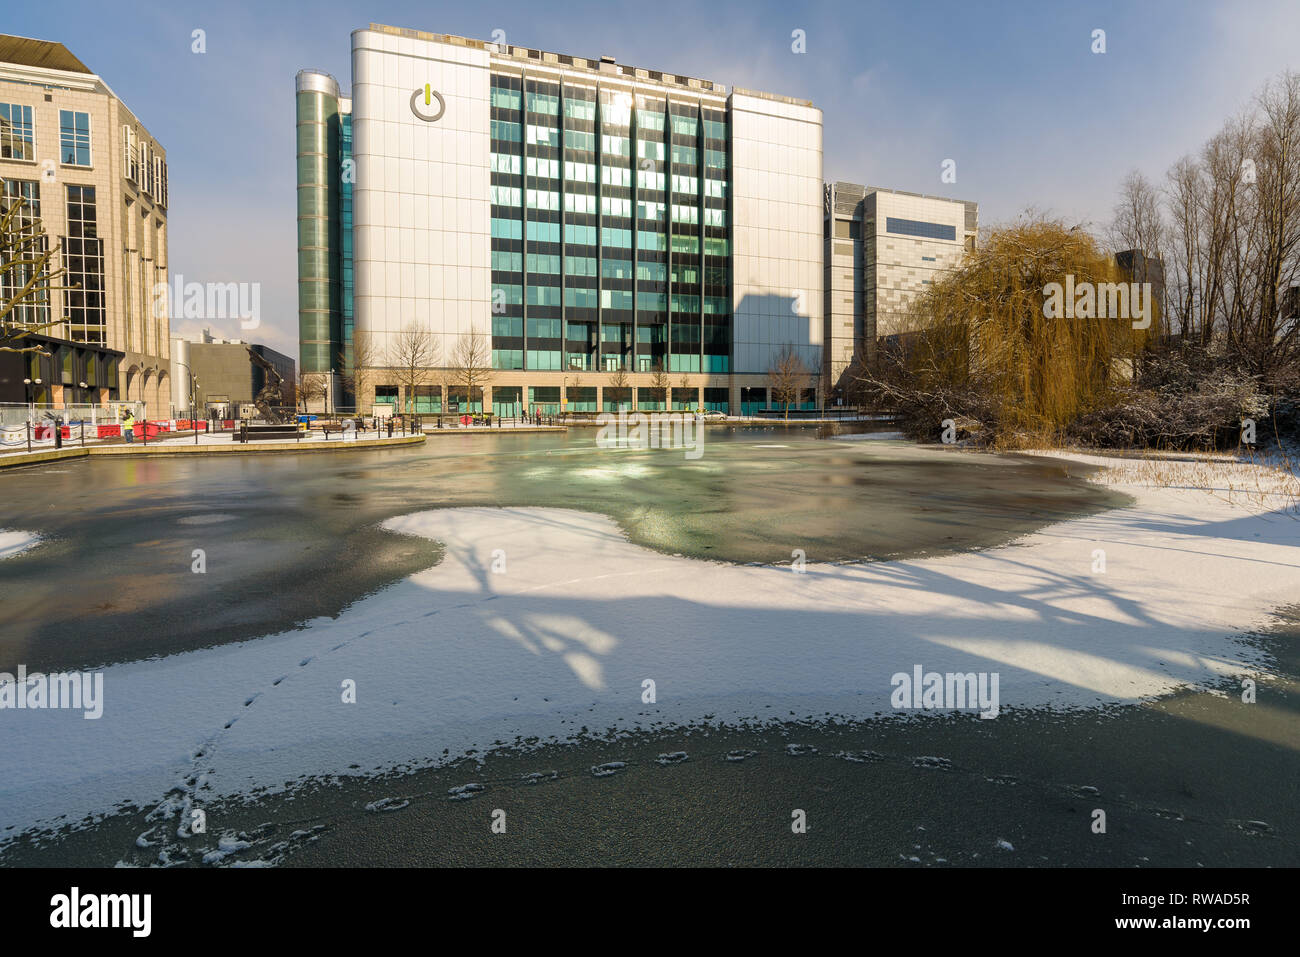 London, England - Feb 2018. Fresh snow covers the frozen pond next to East India DLR station in Poplar. In the background the Global Switch building. Stock Photo